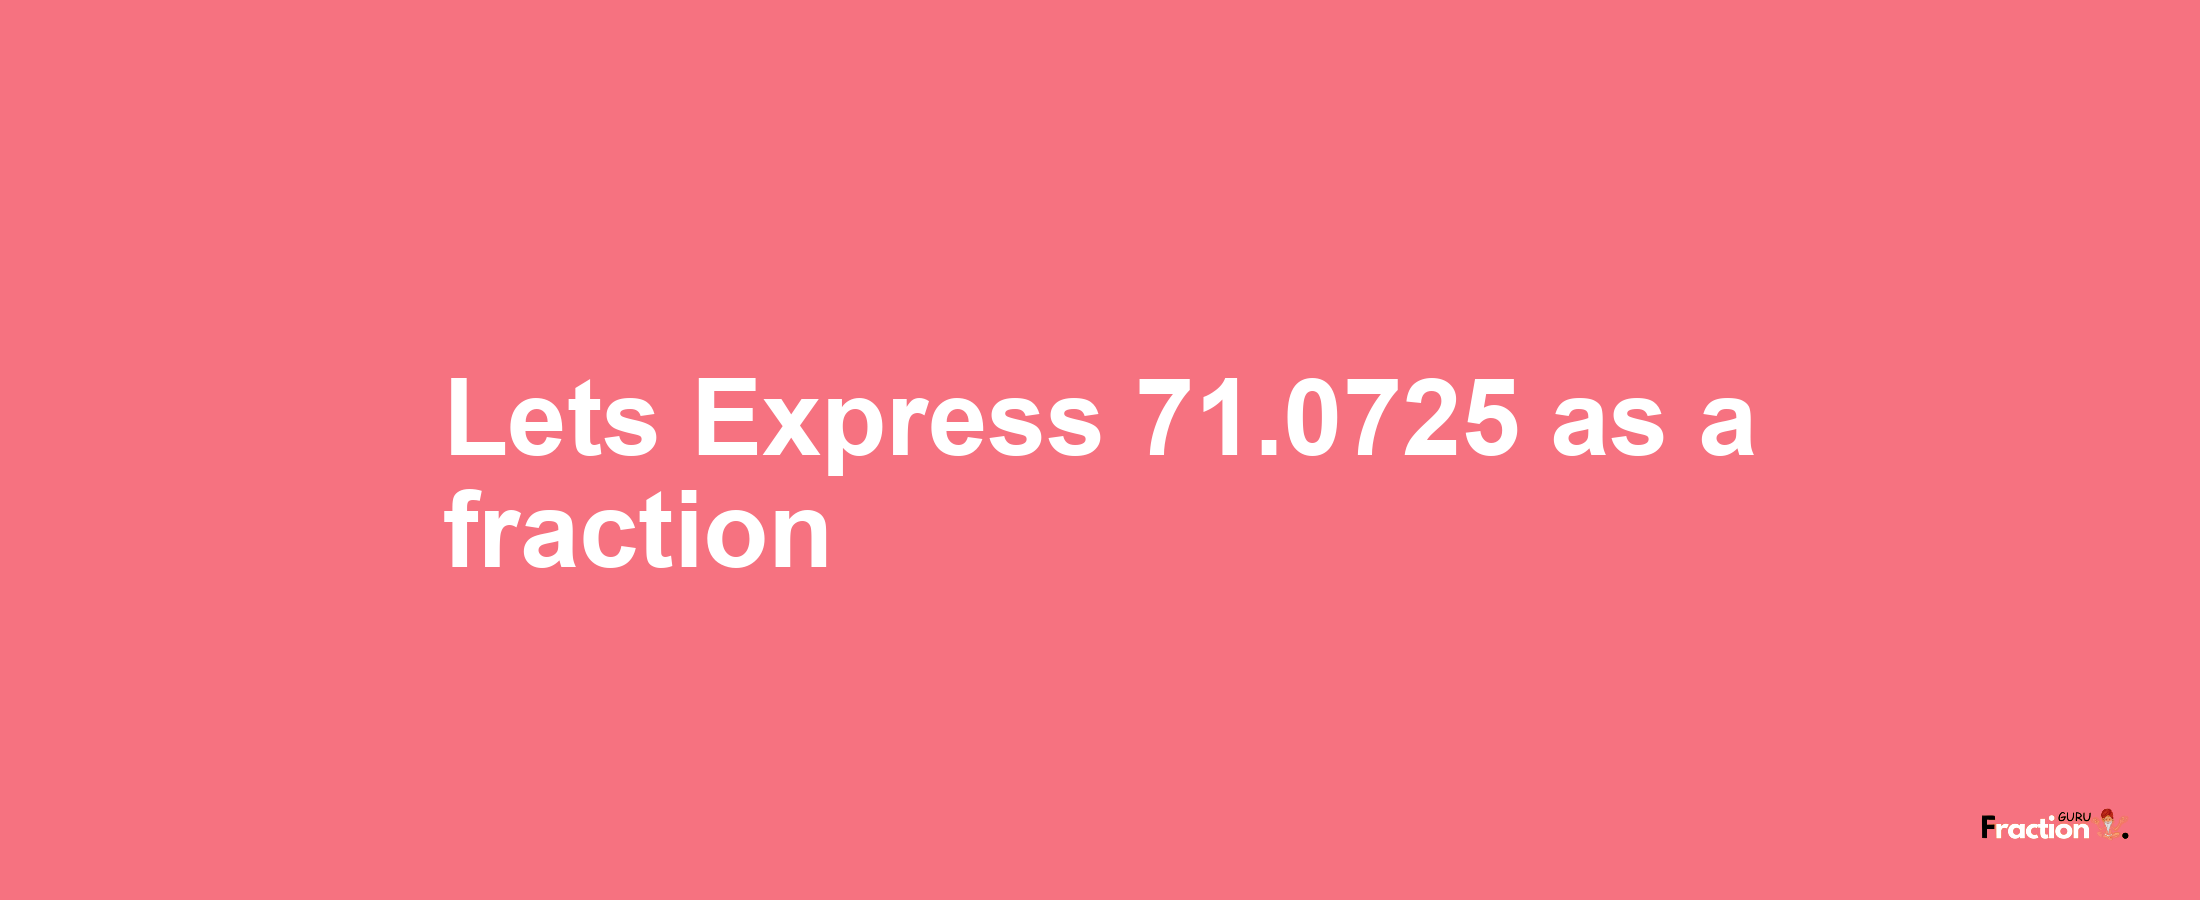 Lets Express 71.0725 as afraction